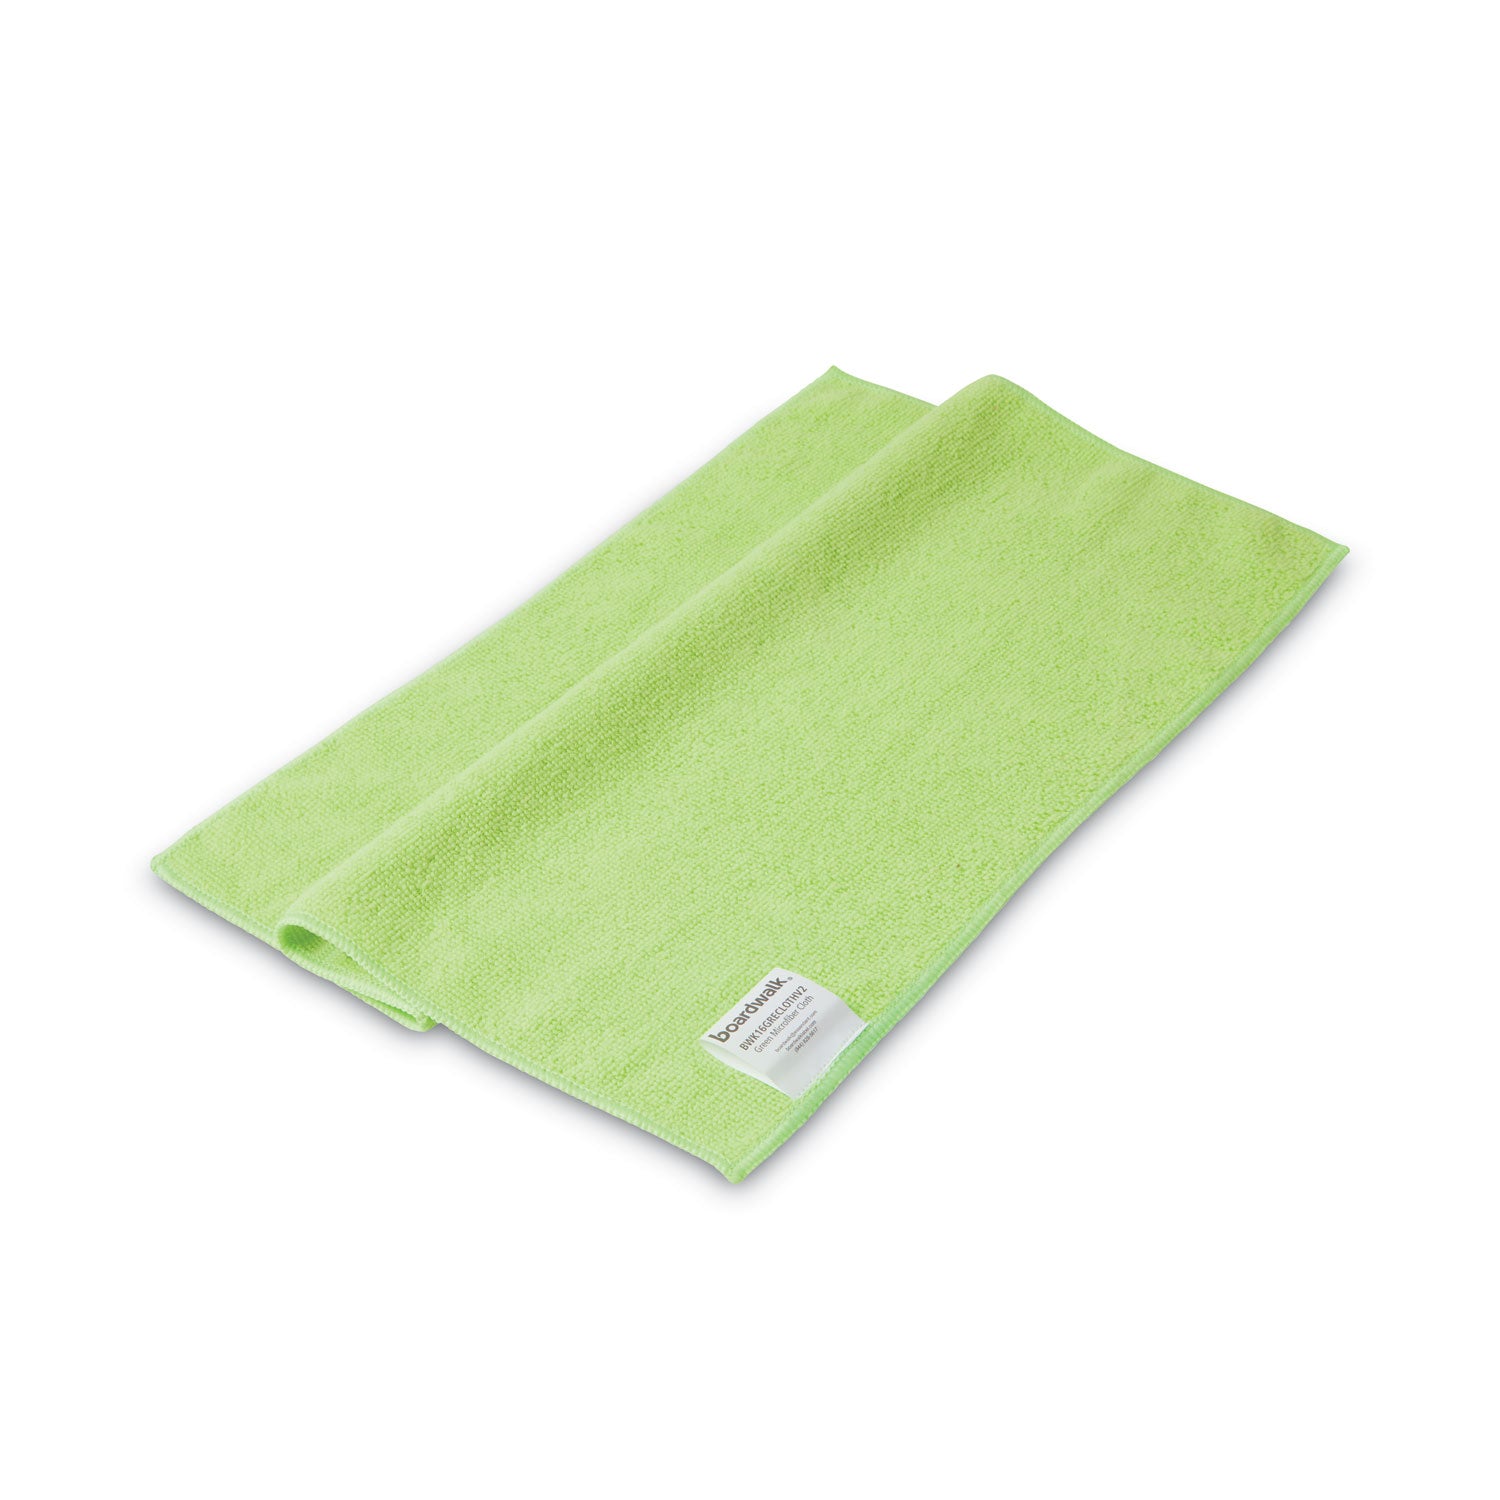 Microfiber Cleaning Cloths, 16 x 16, Green, 24/Pack - 2